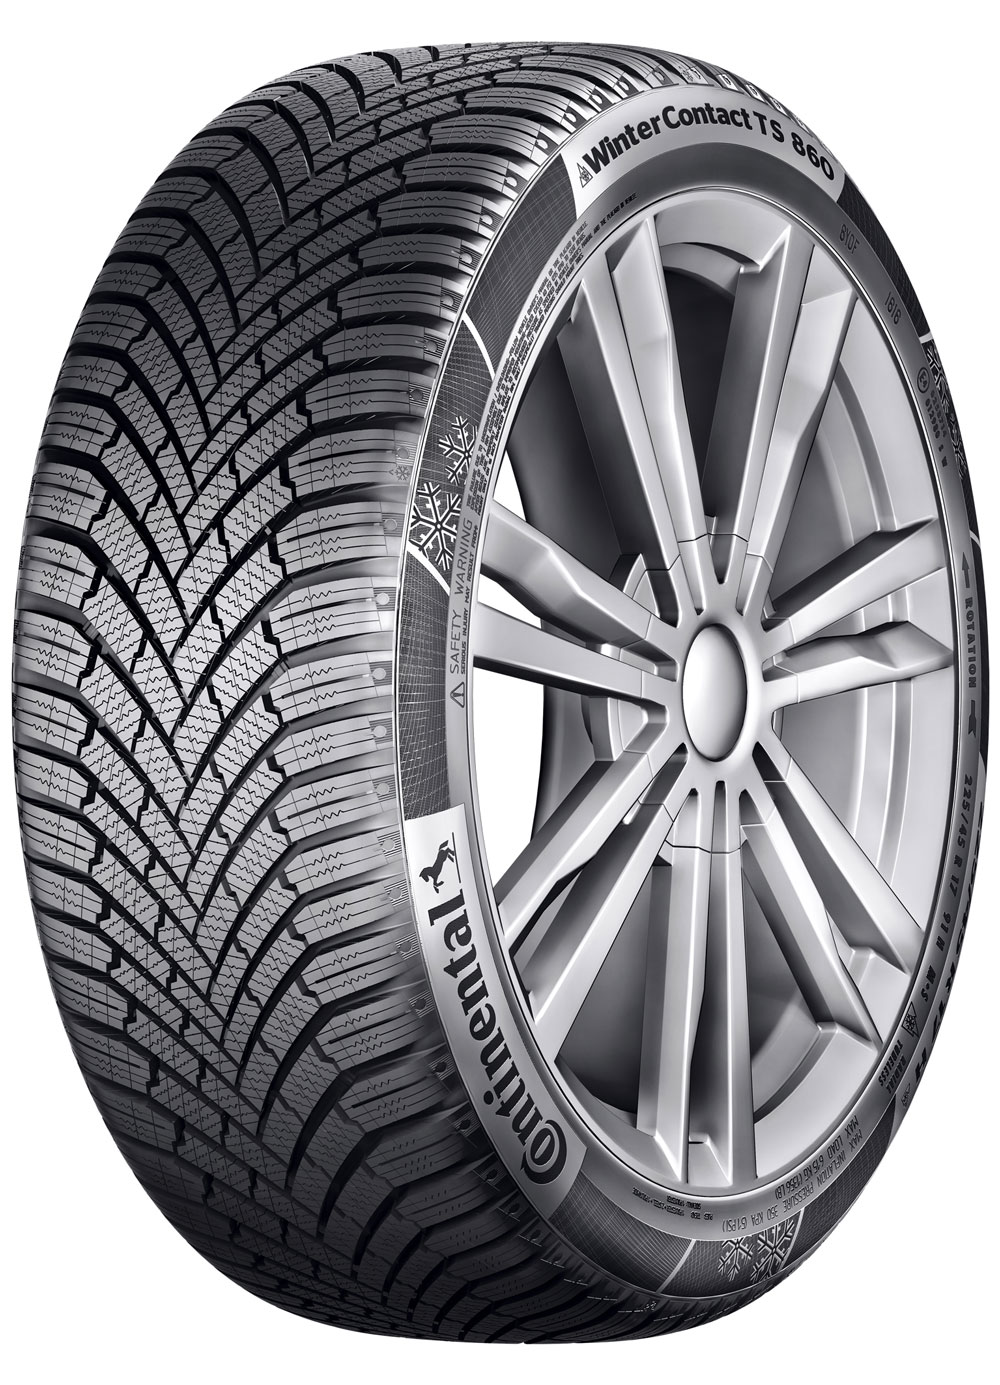 Anvelopa Iarna Continental Winter Contact Ts860s 205/45R18 90H